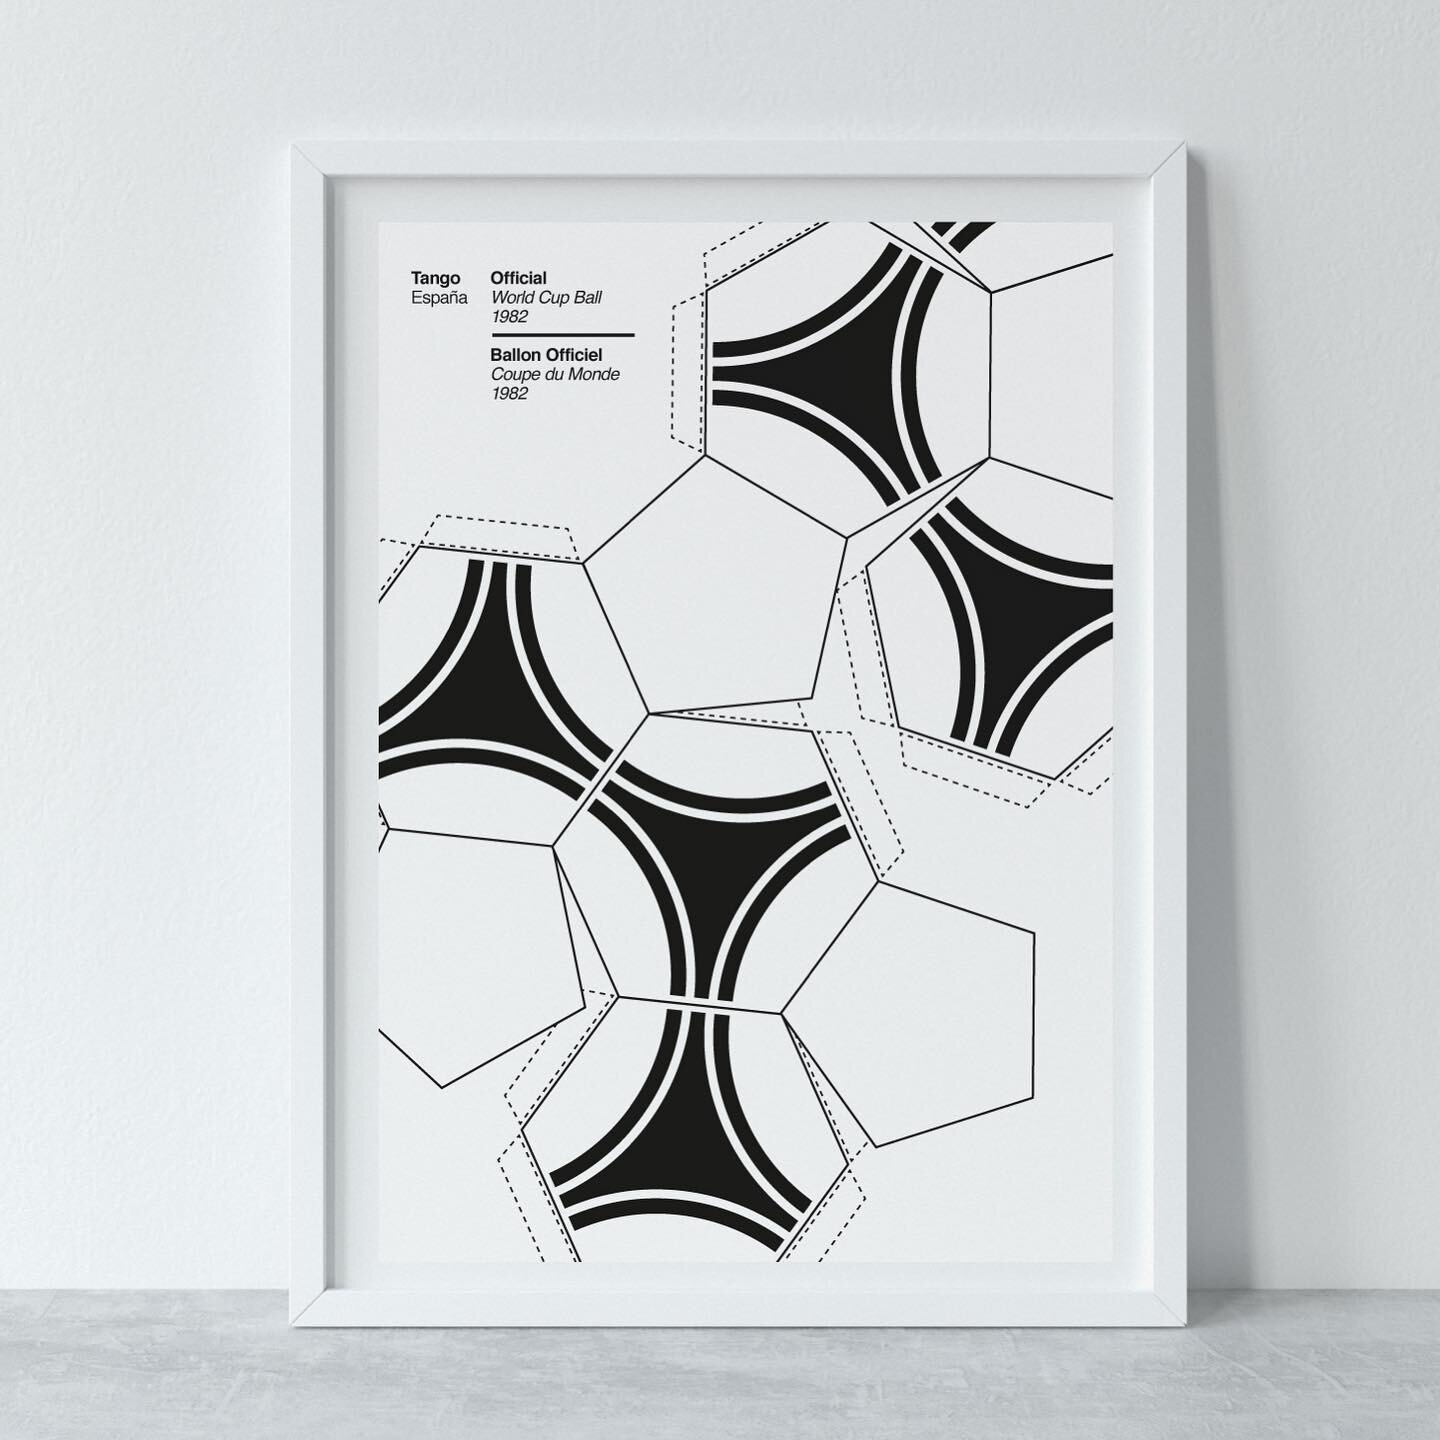 Tango - another classic ball worth celebrating. From the &lsquo;82 Espa&ntilde;a World Cup. 
Sized A2 or A1 and printed on 190gsm matte stock. Sometimes bigger is better - and this print definitely looks better bigger! 
Shop @generalobservatory 
.
.
